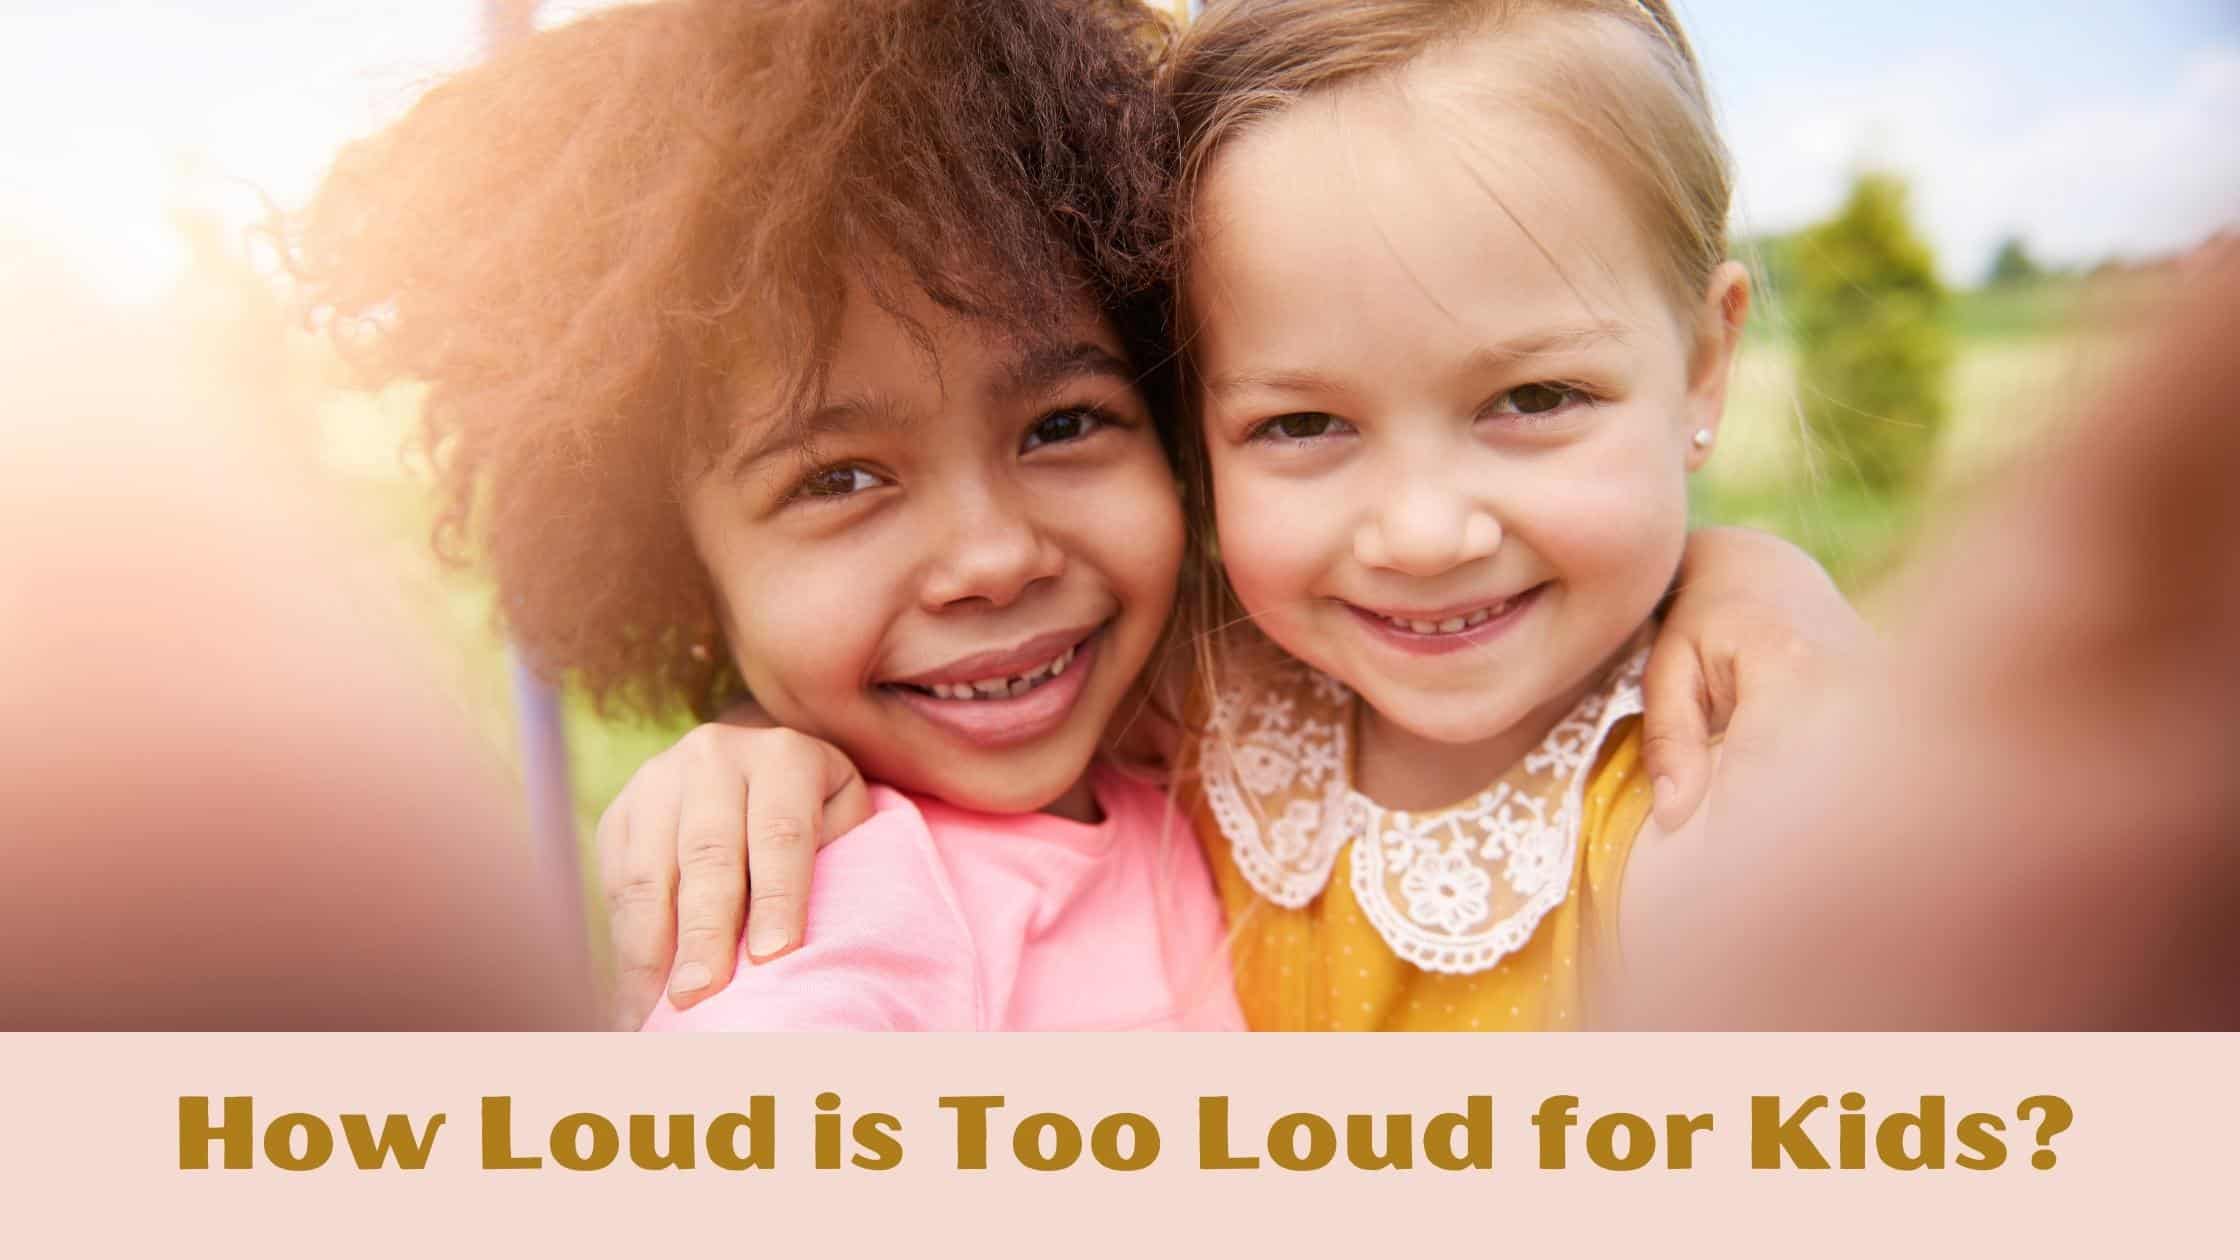 How Loud is to loud for kids?